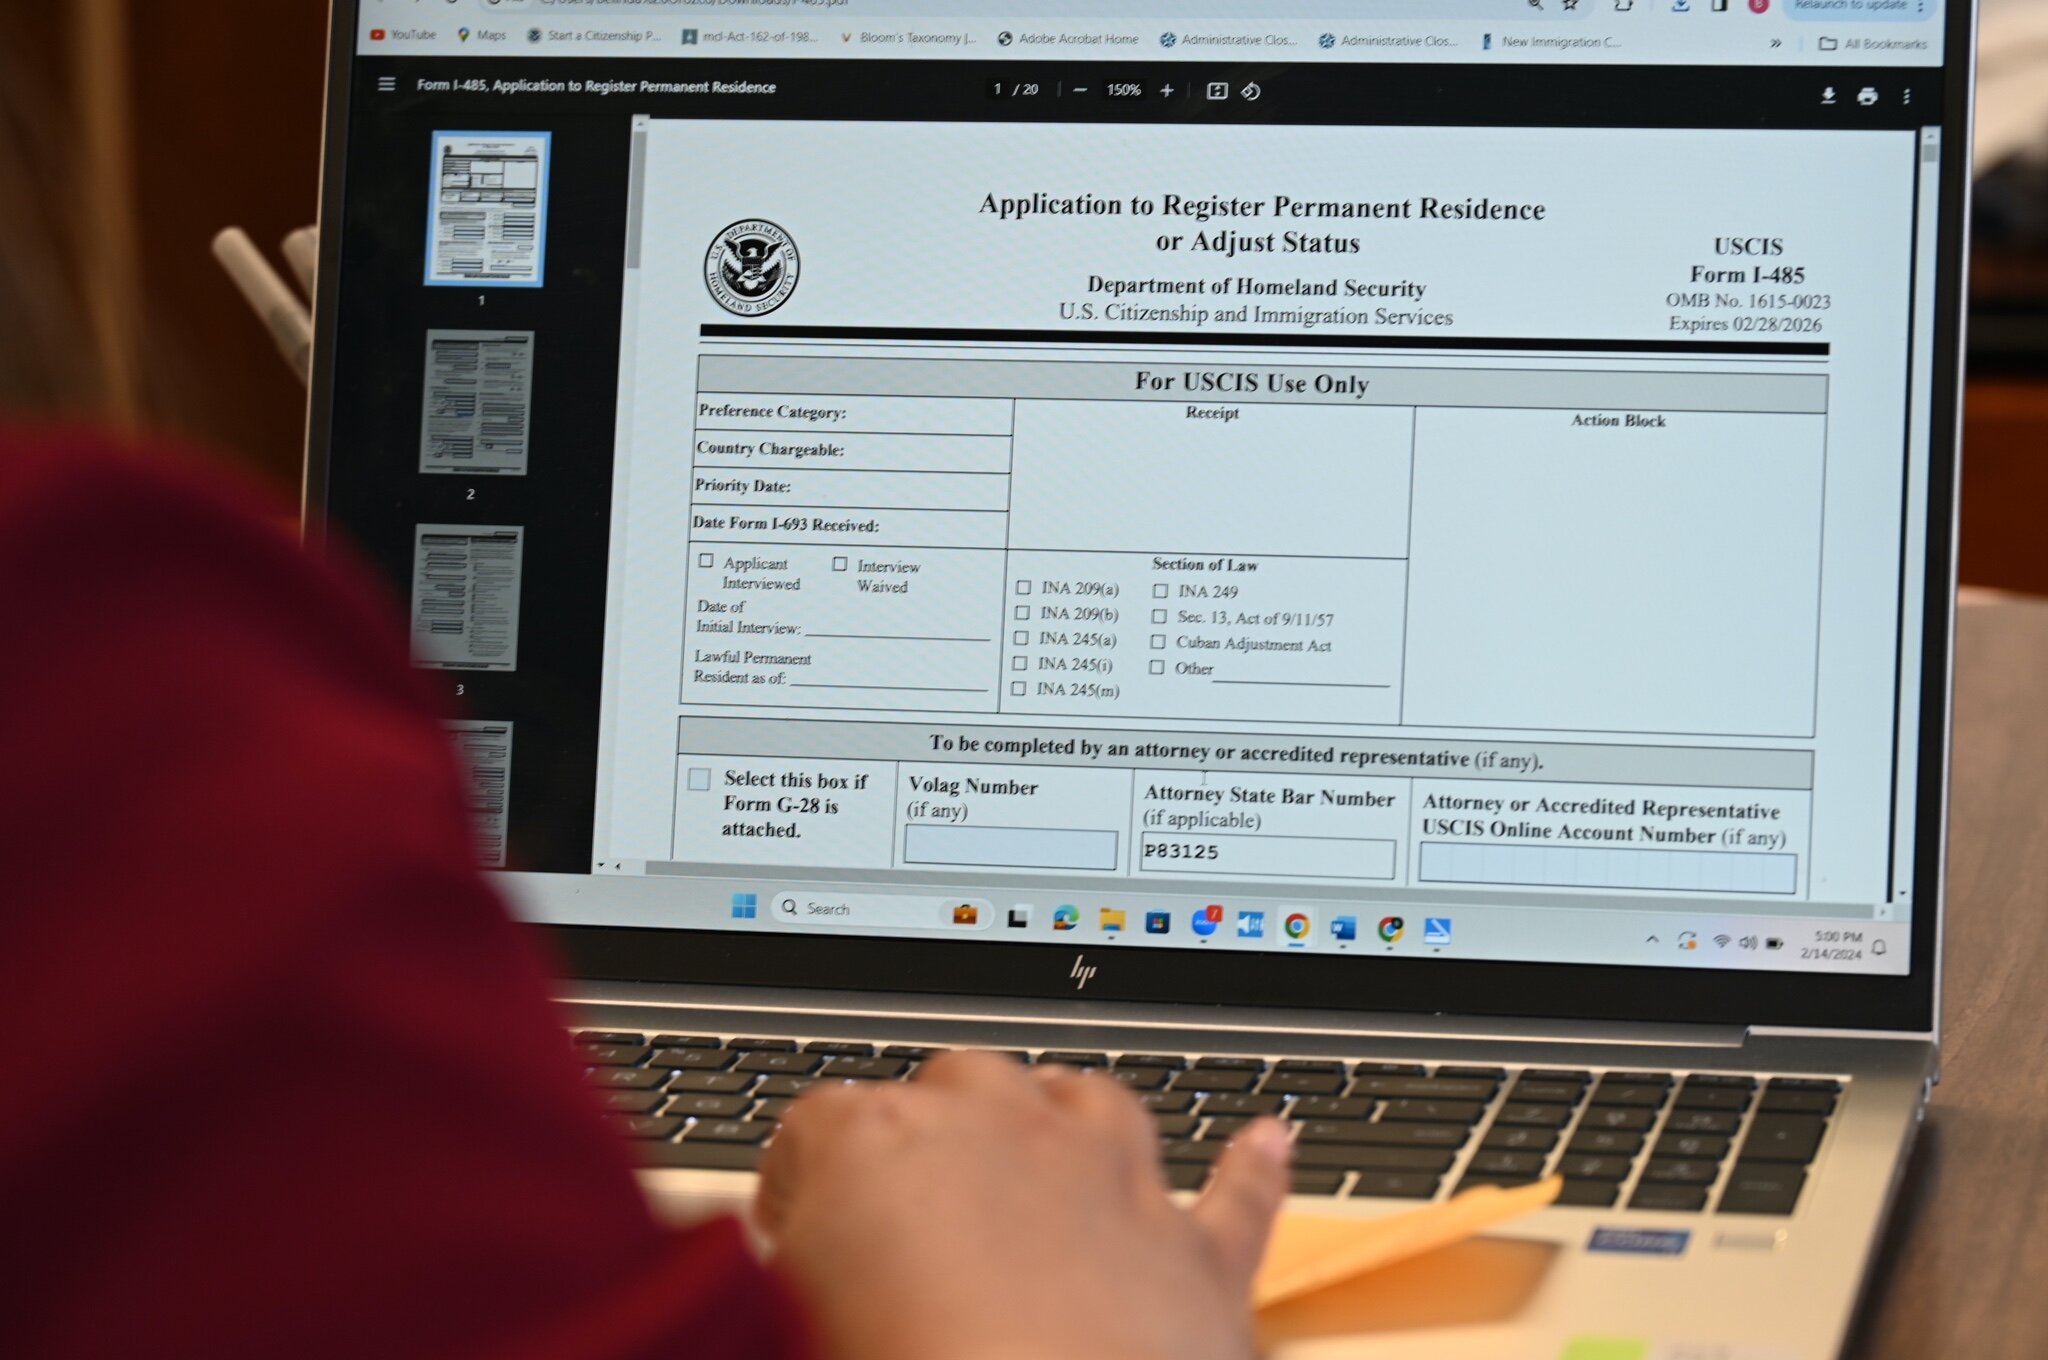 Belinda M. Orozco, Esq. looks at immigration forms from the U.S. Citizenship and Immigration Services website.